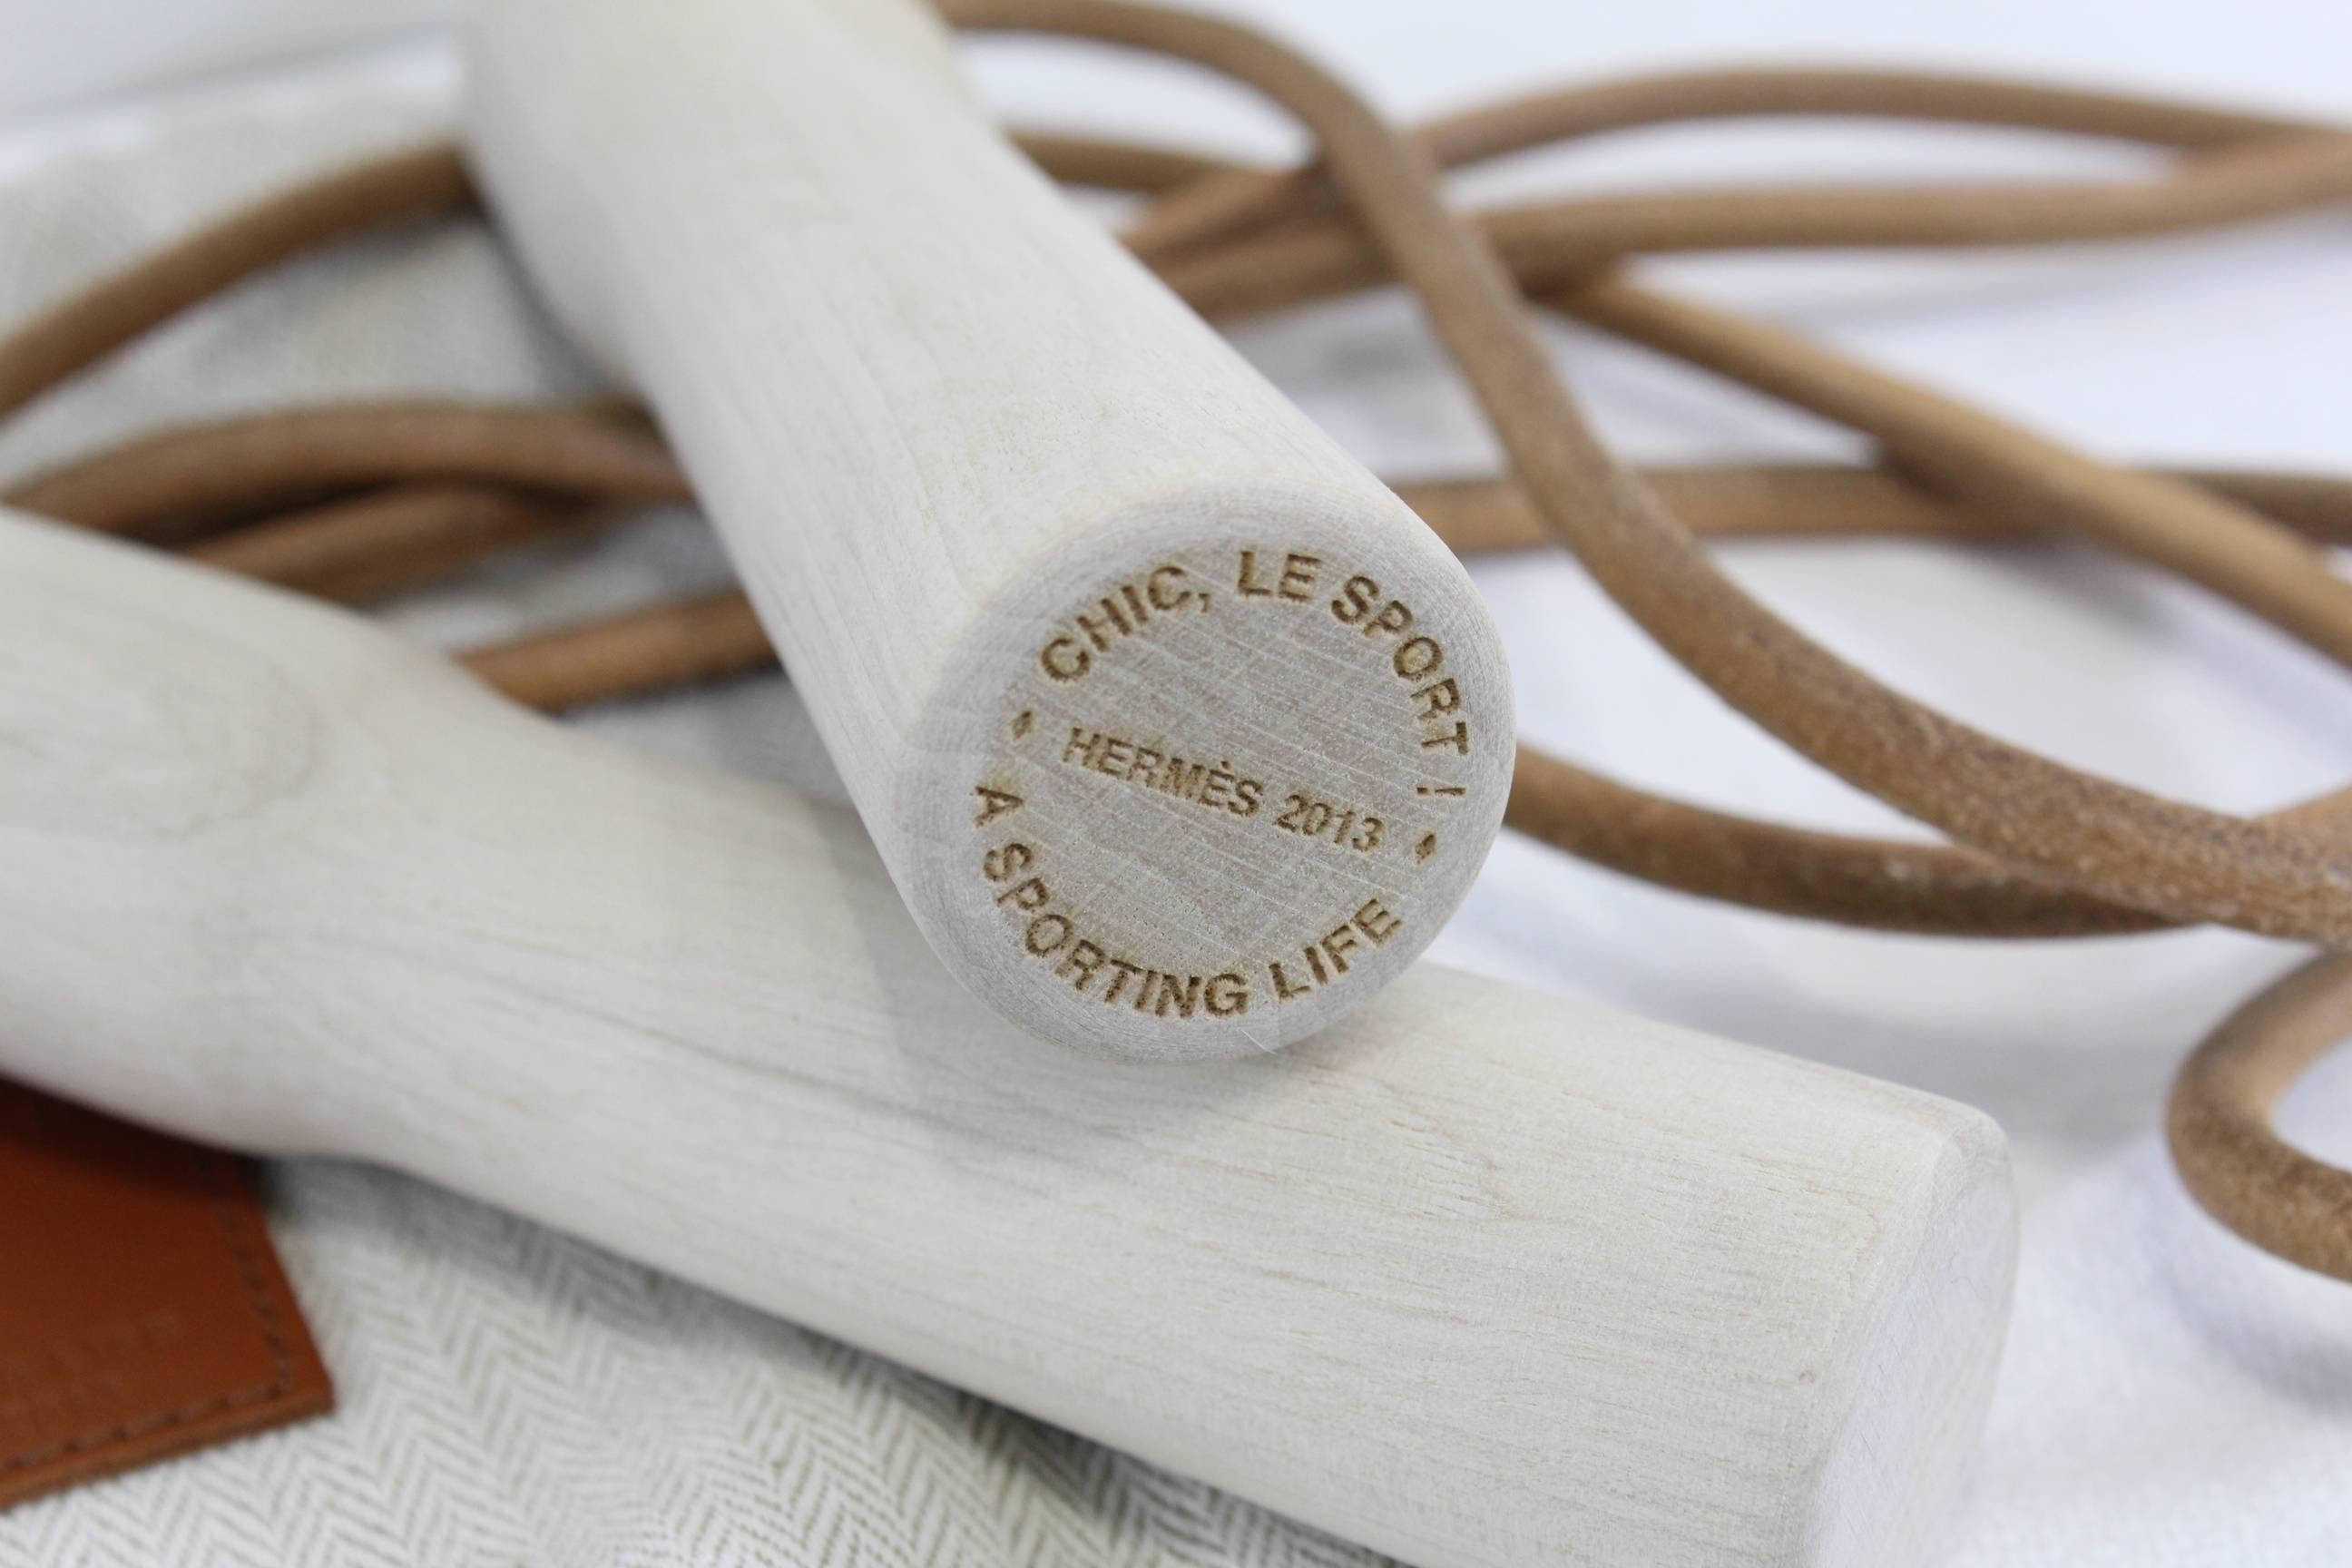 Rare Hermes Jumping Rope in wood and leather.  Leathe lenght around 280 cm (110 inches)

With dust bag

Excellent condition